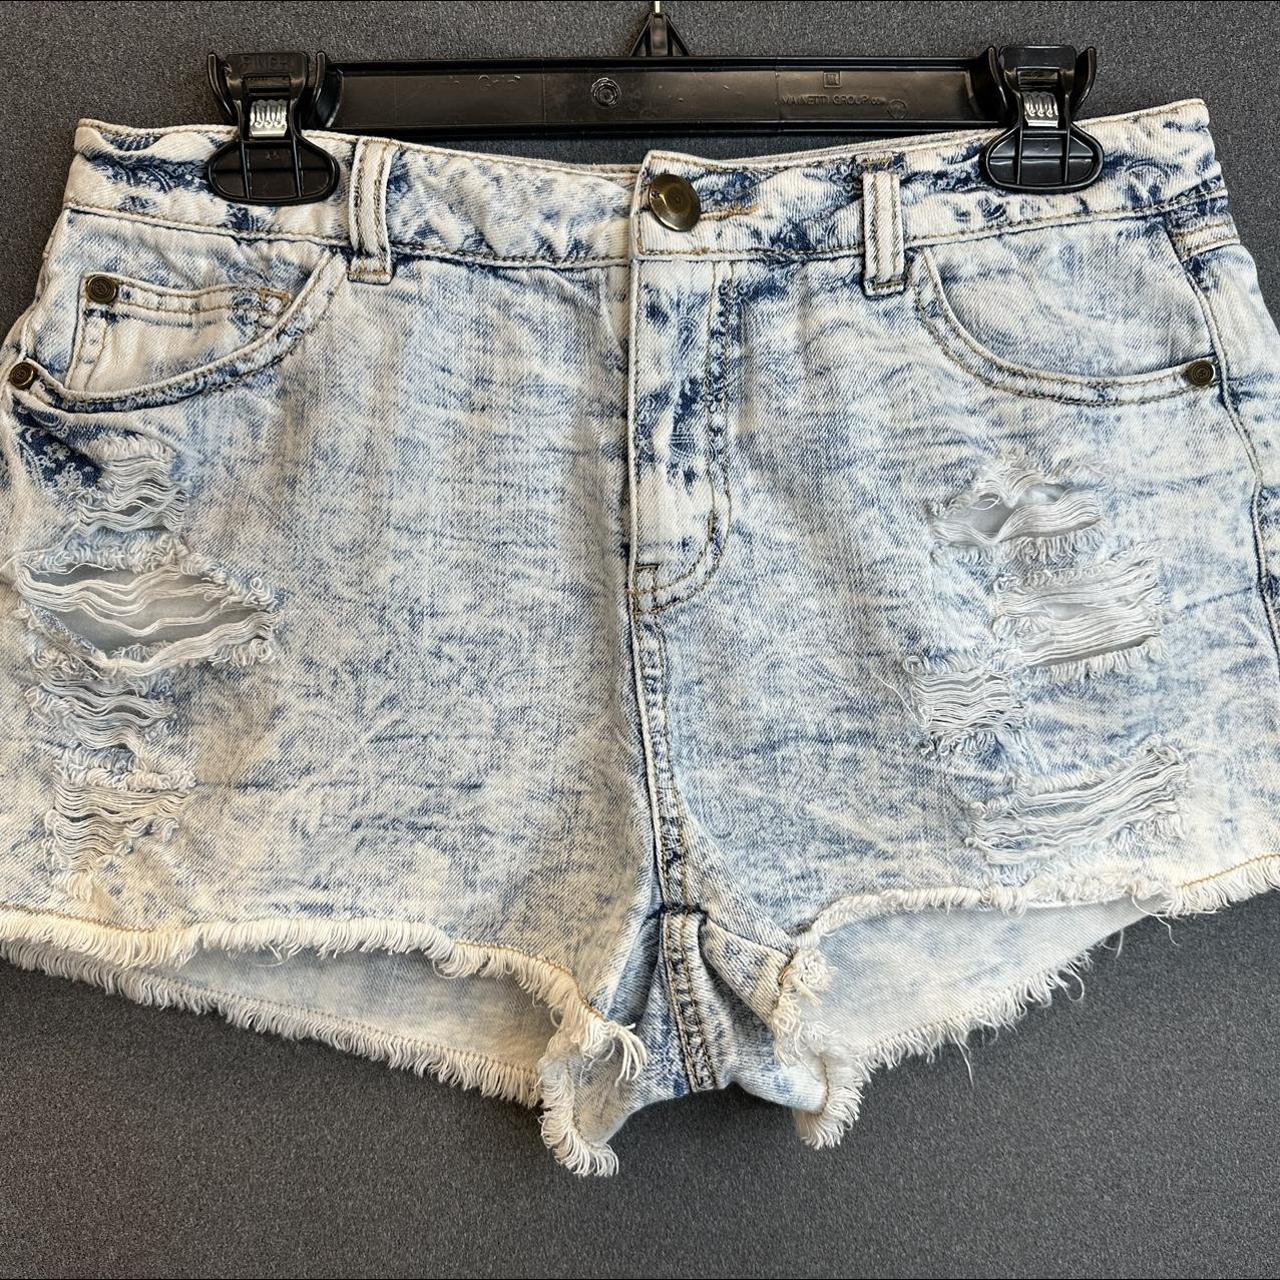 Boom boom jeans size 9 Booty cut out style shorts - Depop